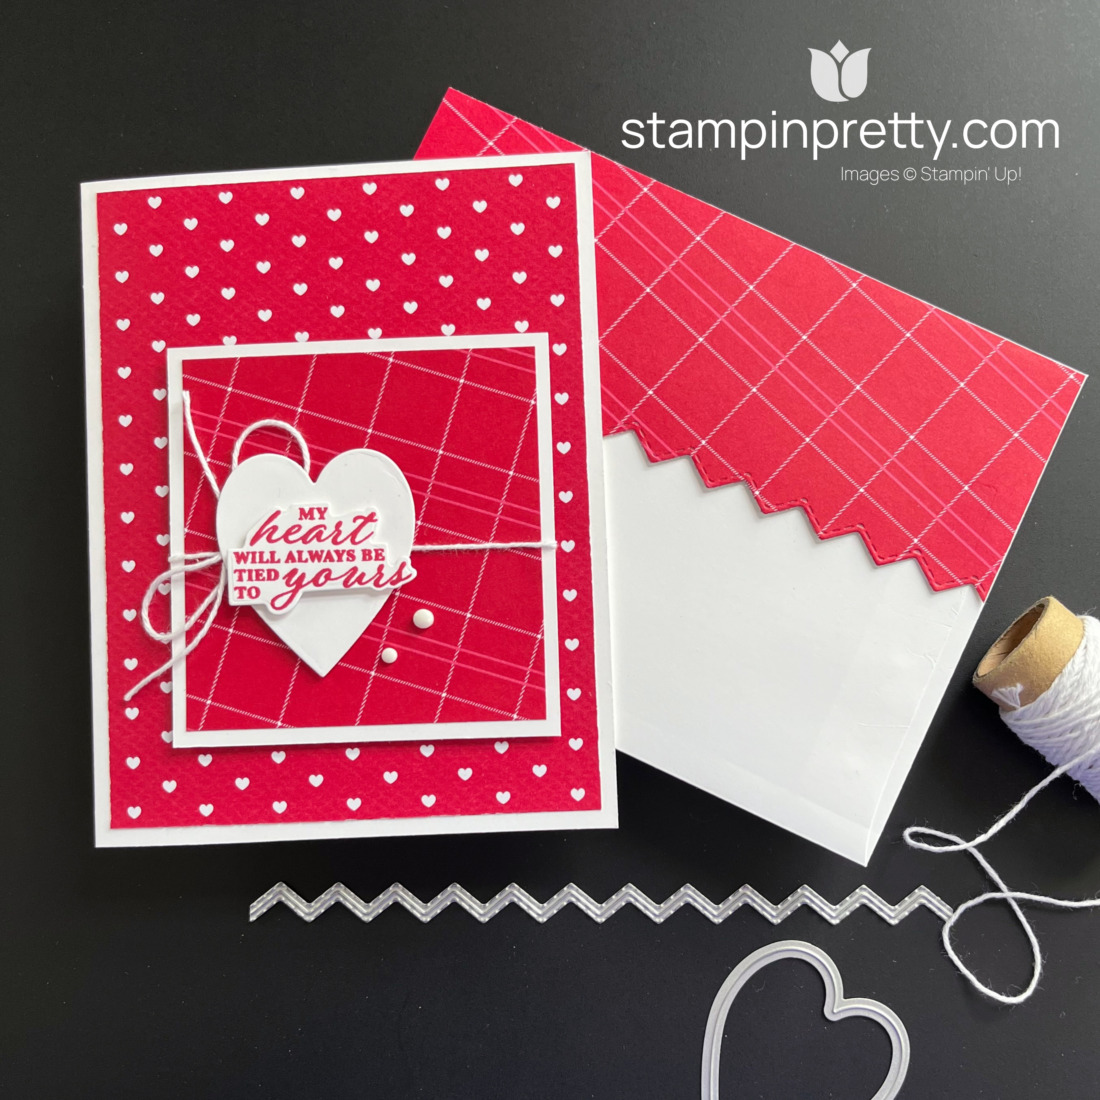 Most Adored DSP Is Valentine Card Magic!